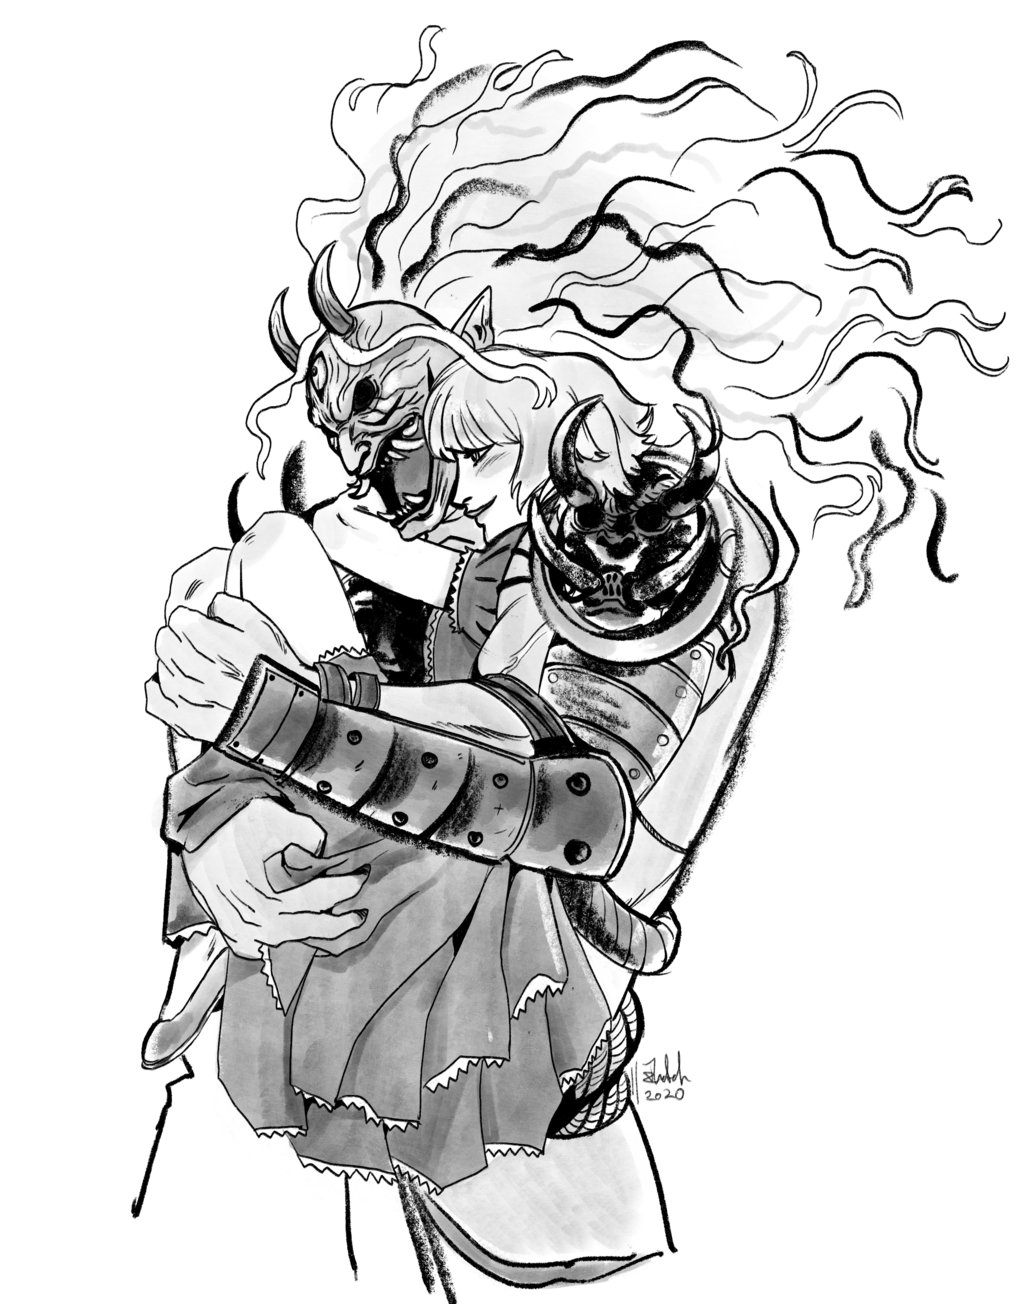 COMMISSION // ONI AND CHIPY